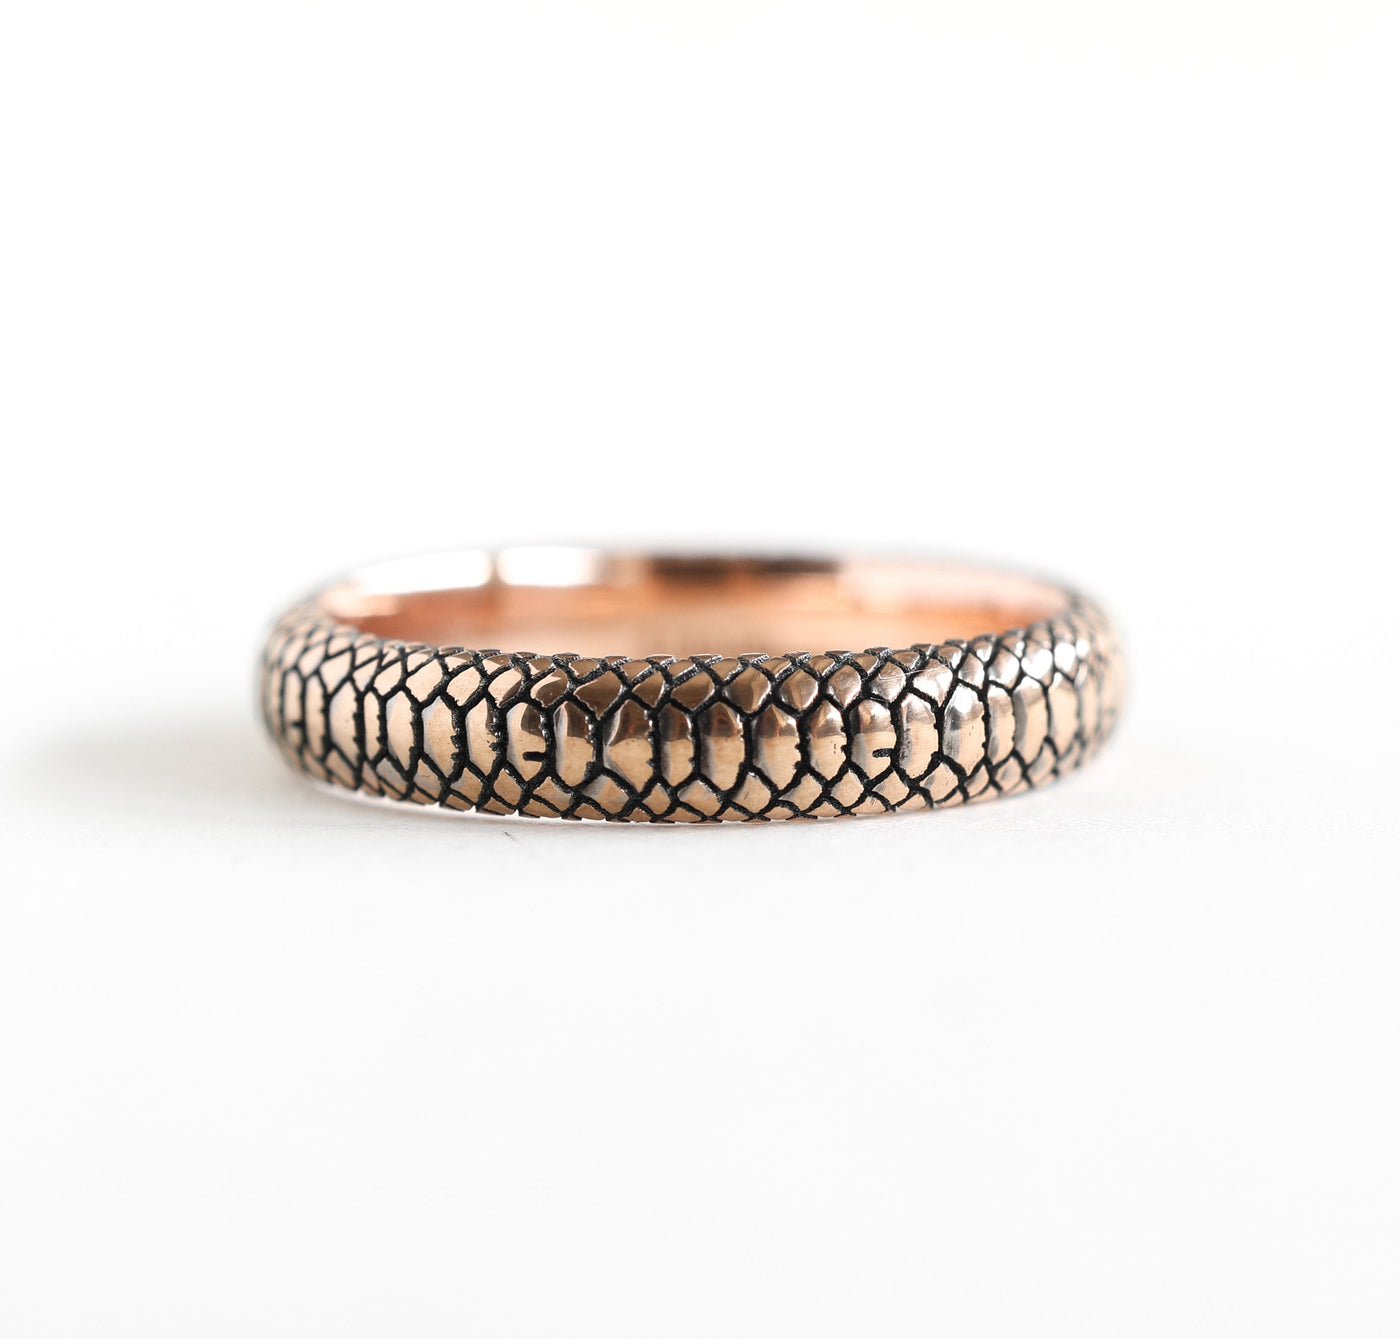 Gold snake band textured ring